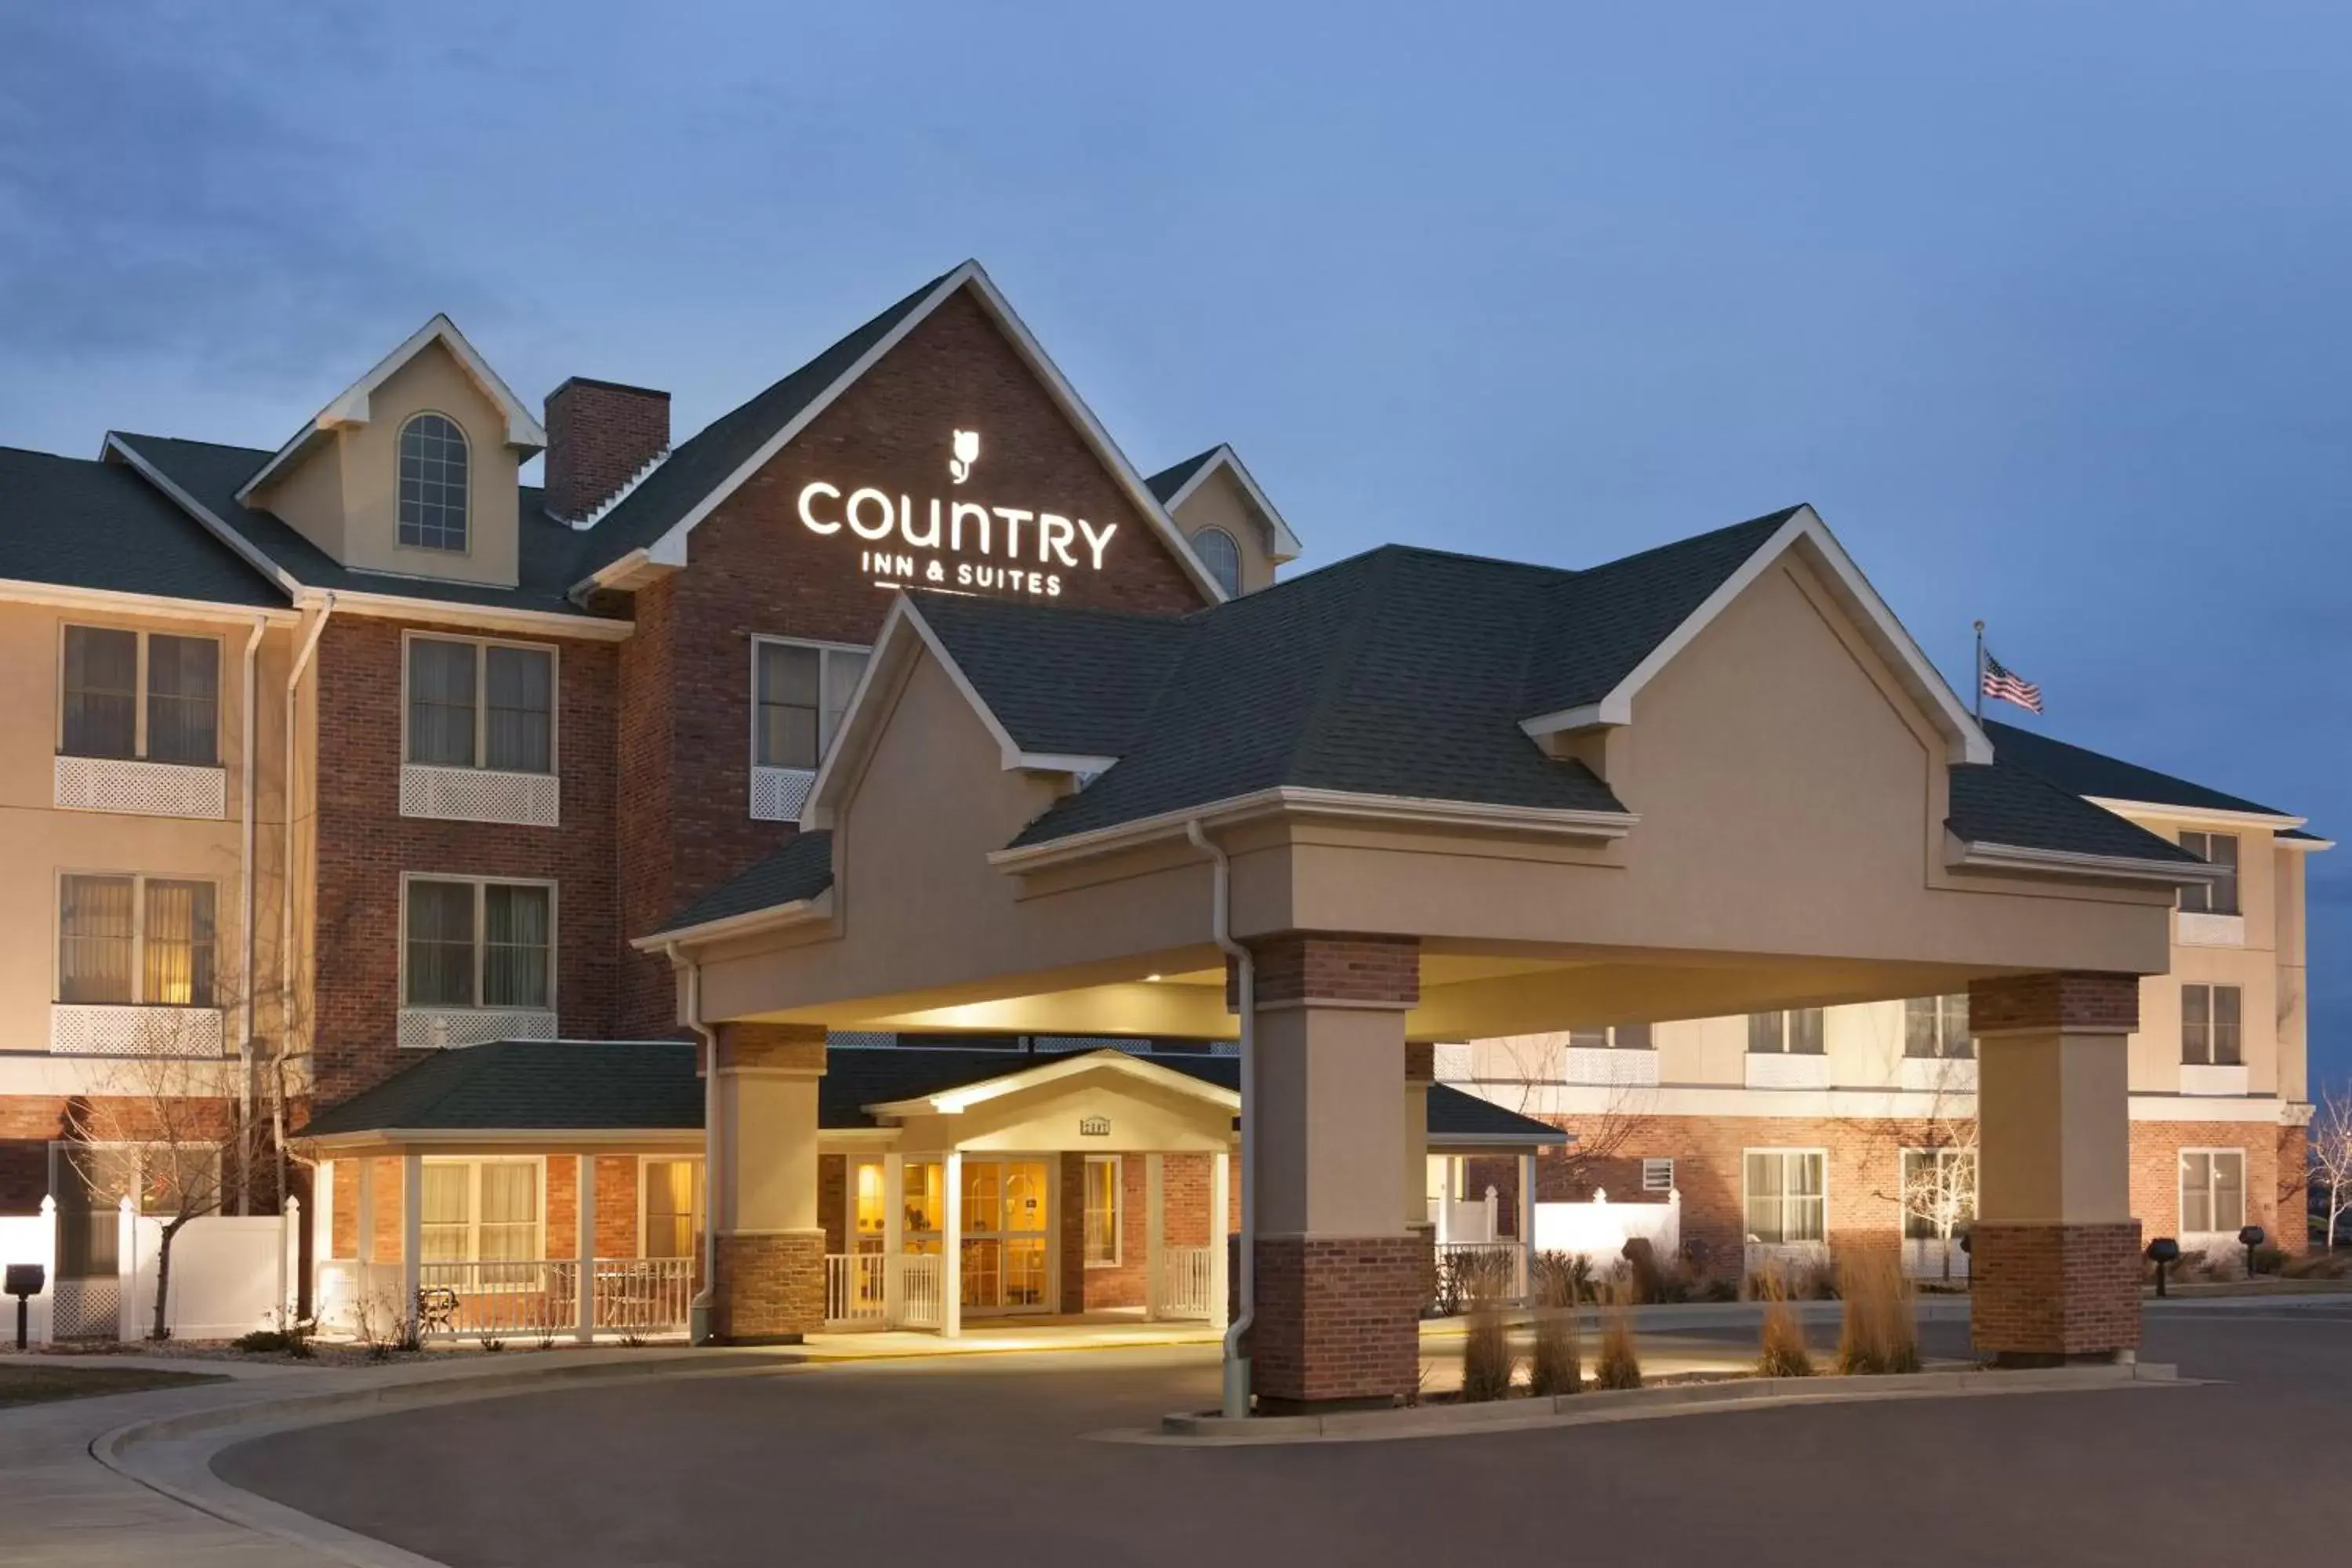 Property Building in Country Inn & Suites by Radisson, Gillette, WY